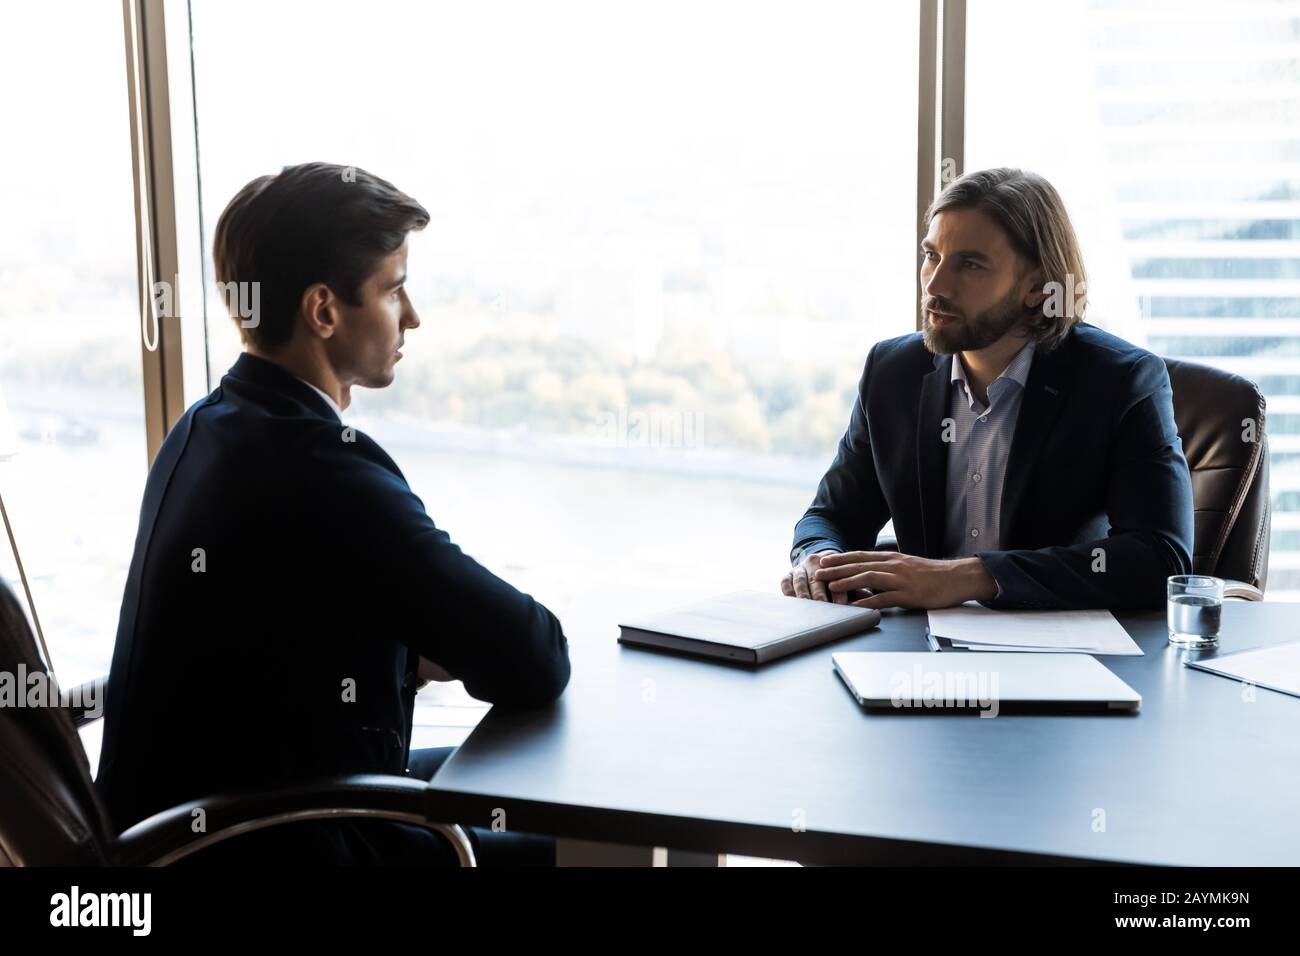 Serious businessman talking with mentor coach lead in office. Stock Photo